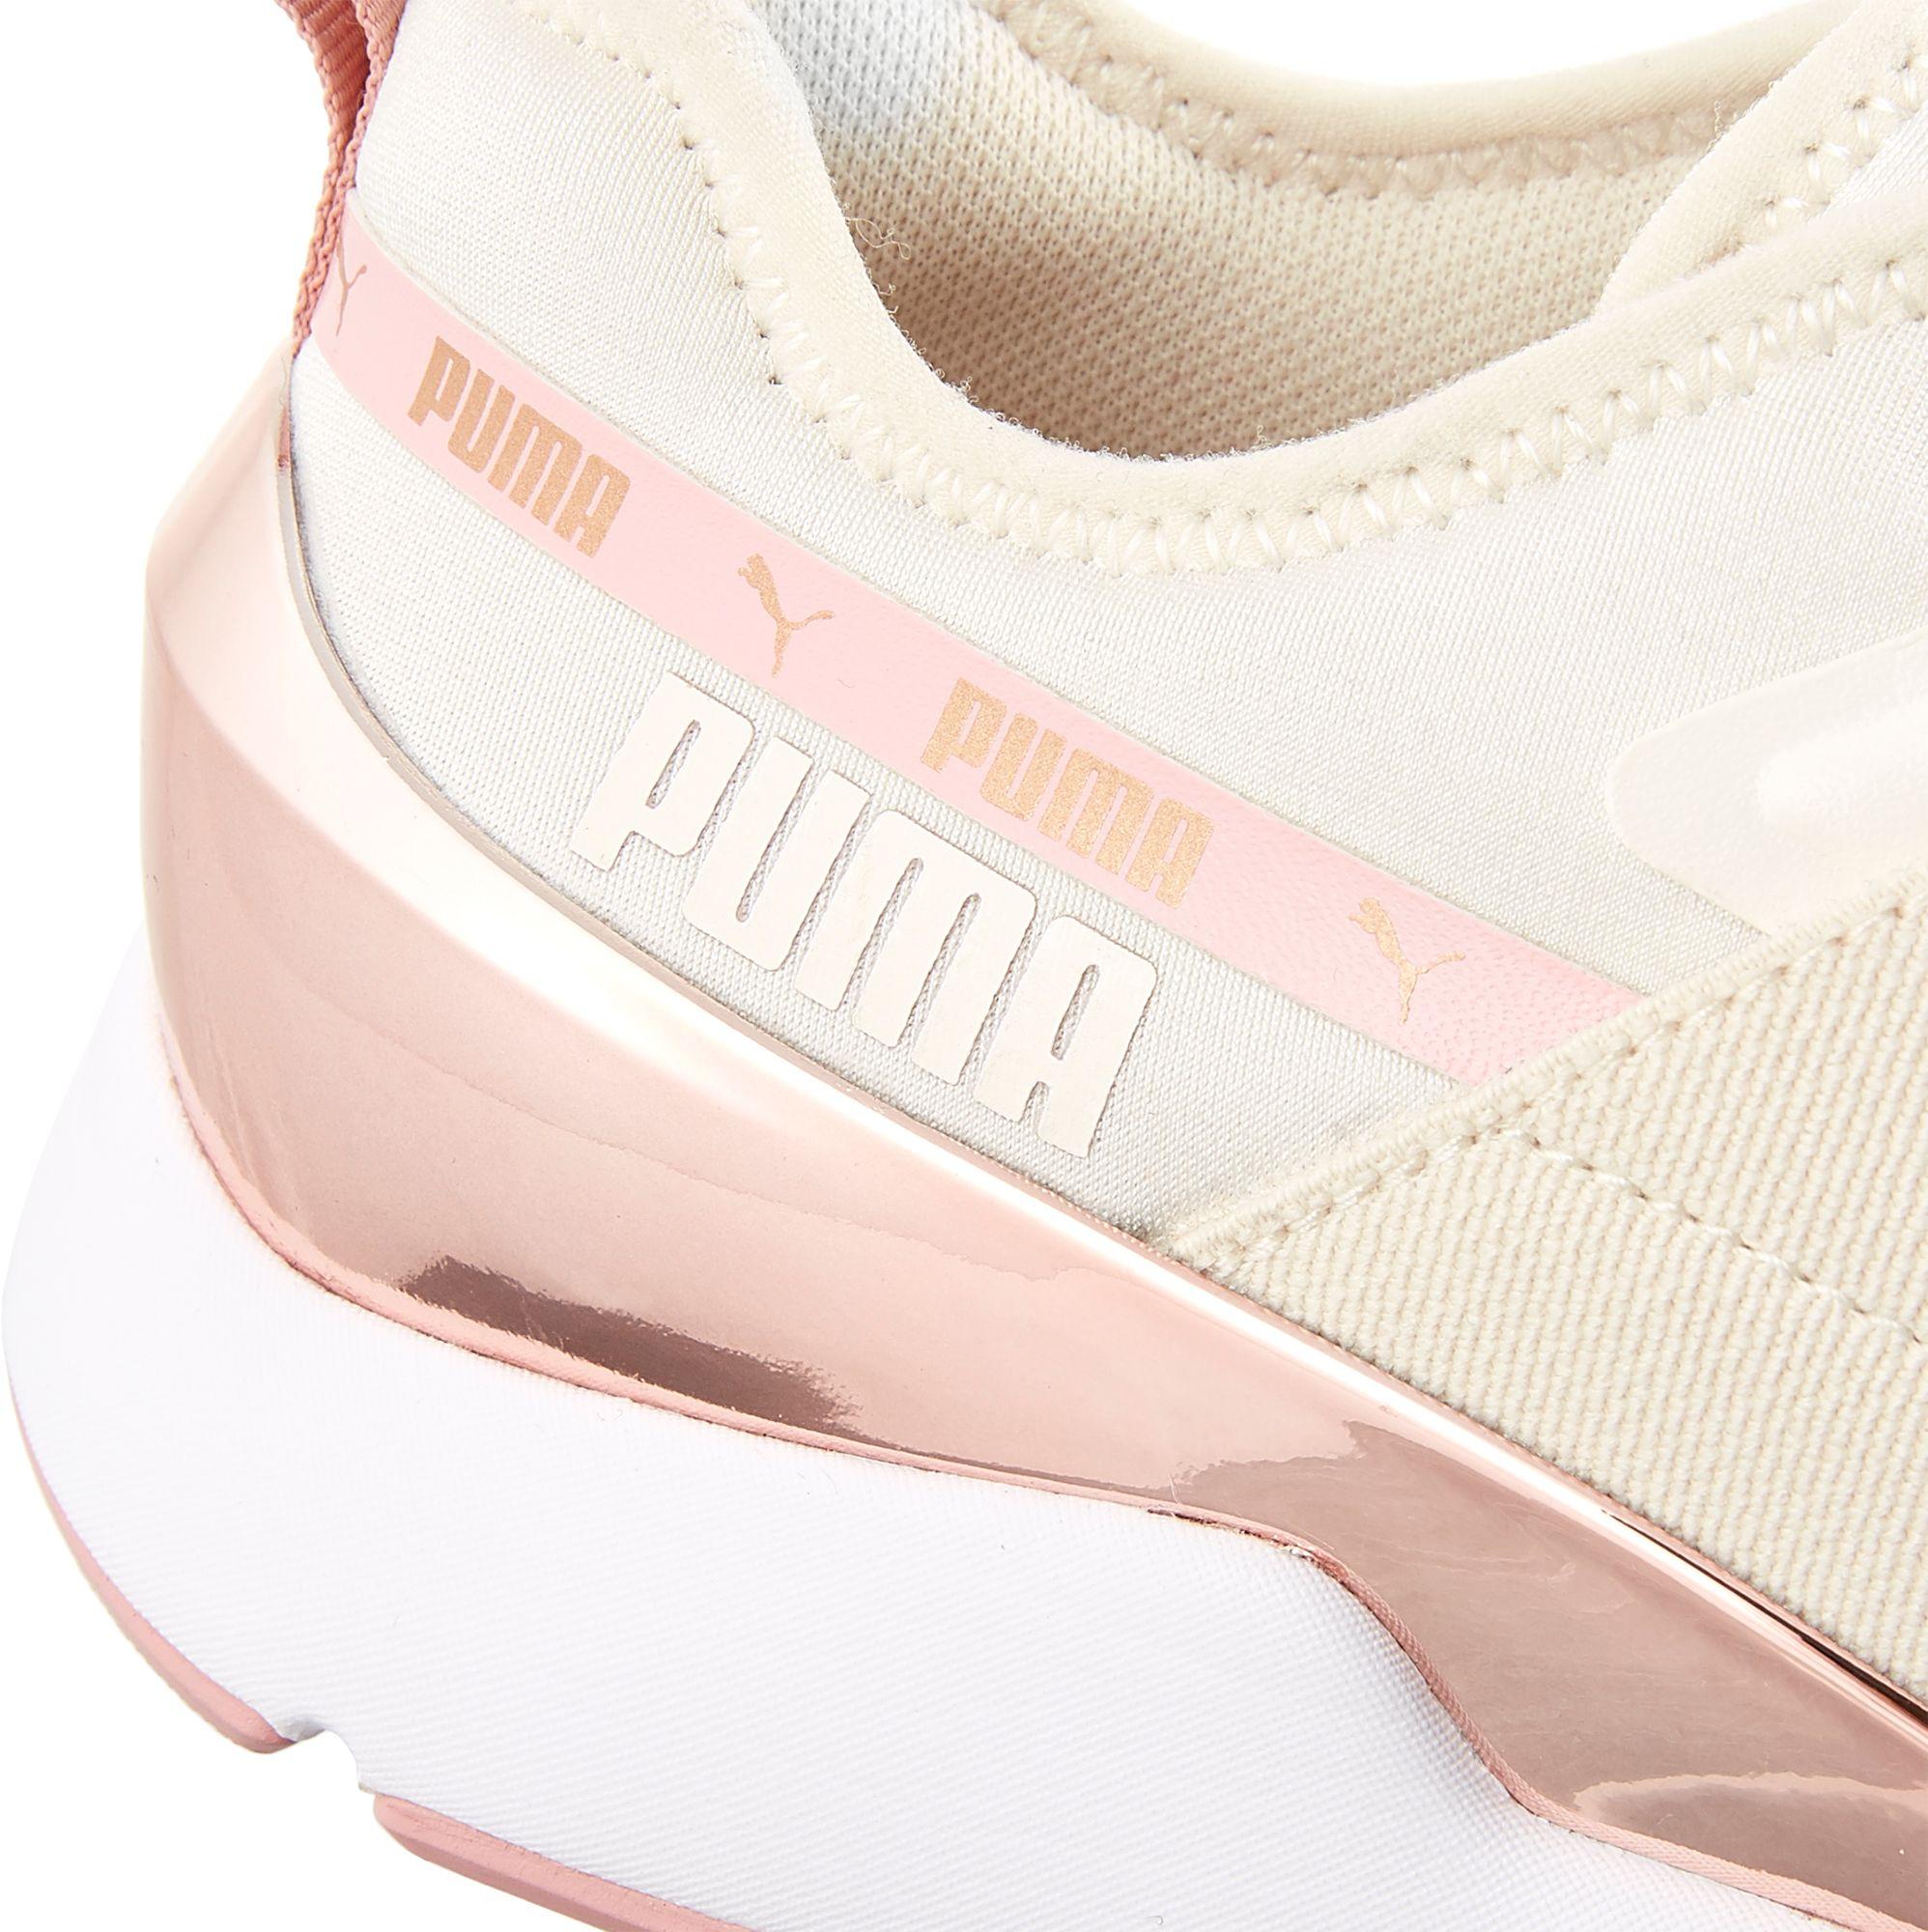 PUMA Muse X-2 Metallic Shoes in Pink/Rose/Gold (Pink) | Lyst